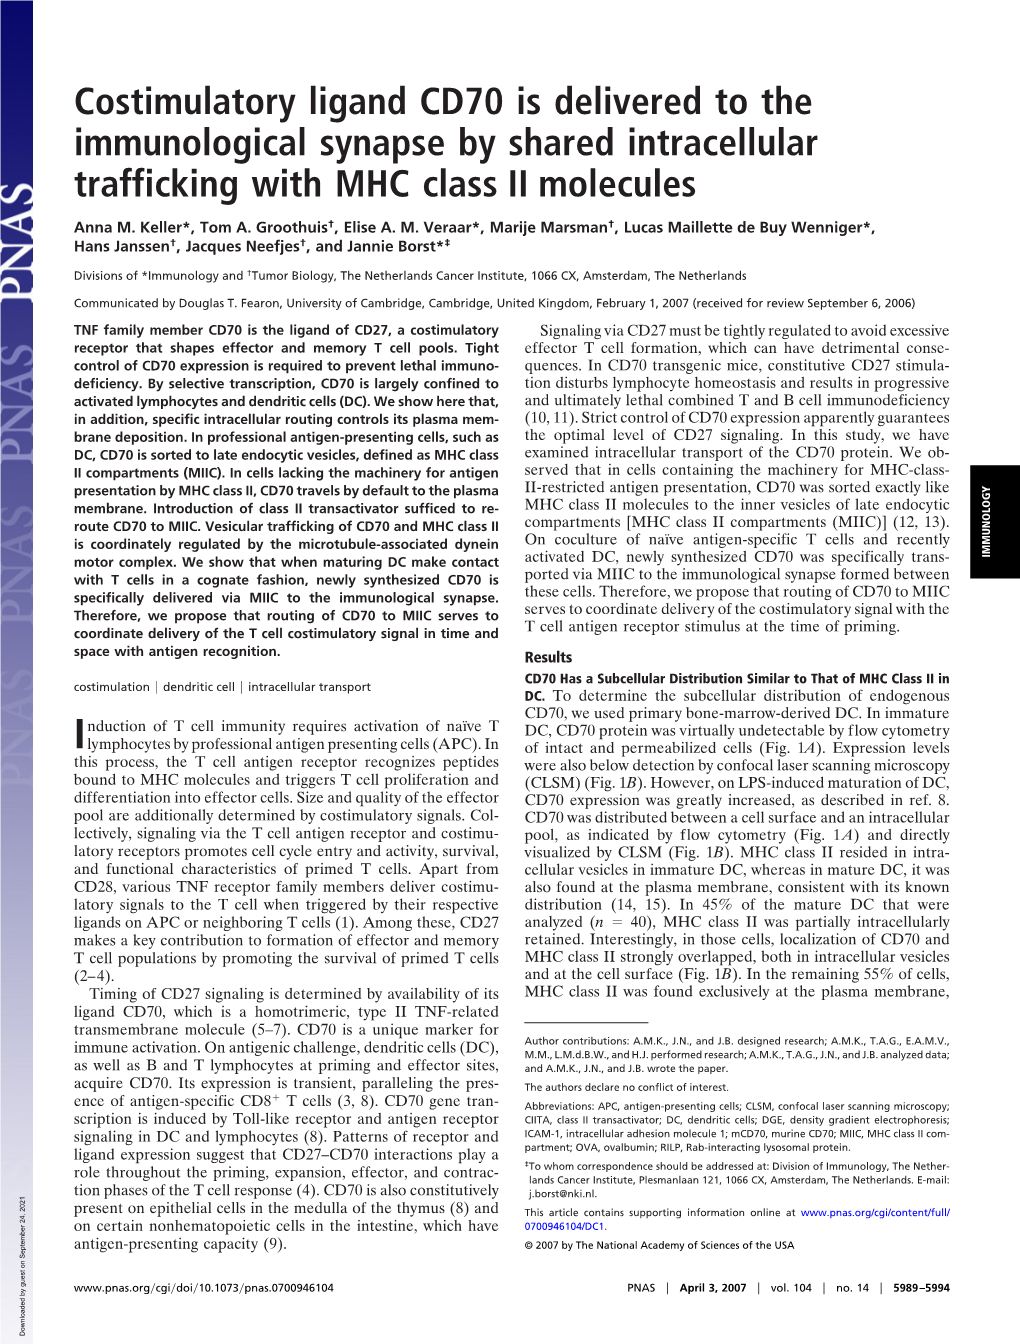 Costimulatory Ligand CD70 Is Delivered to the Immunological Synapse by Shared Intracellular Trafficking with MHC Class II Molecules